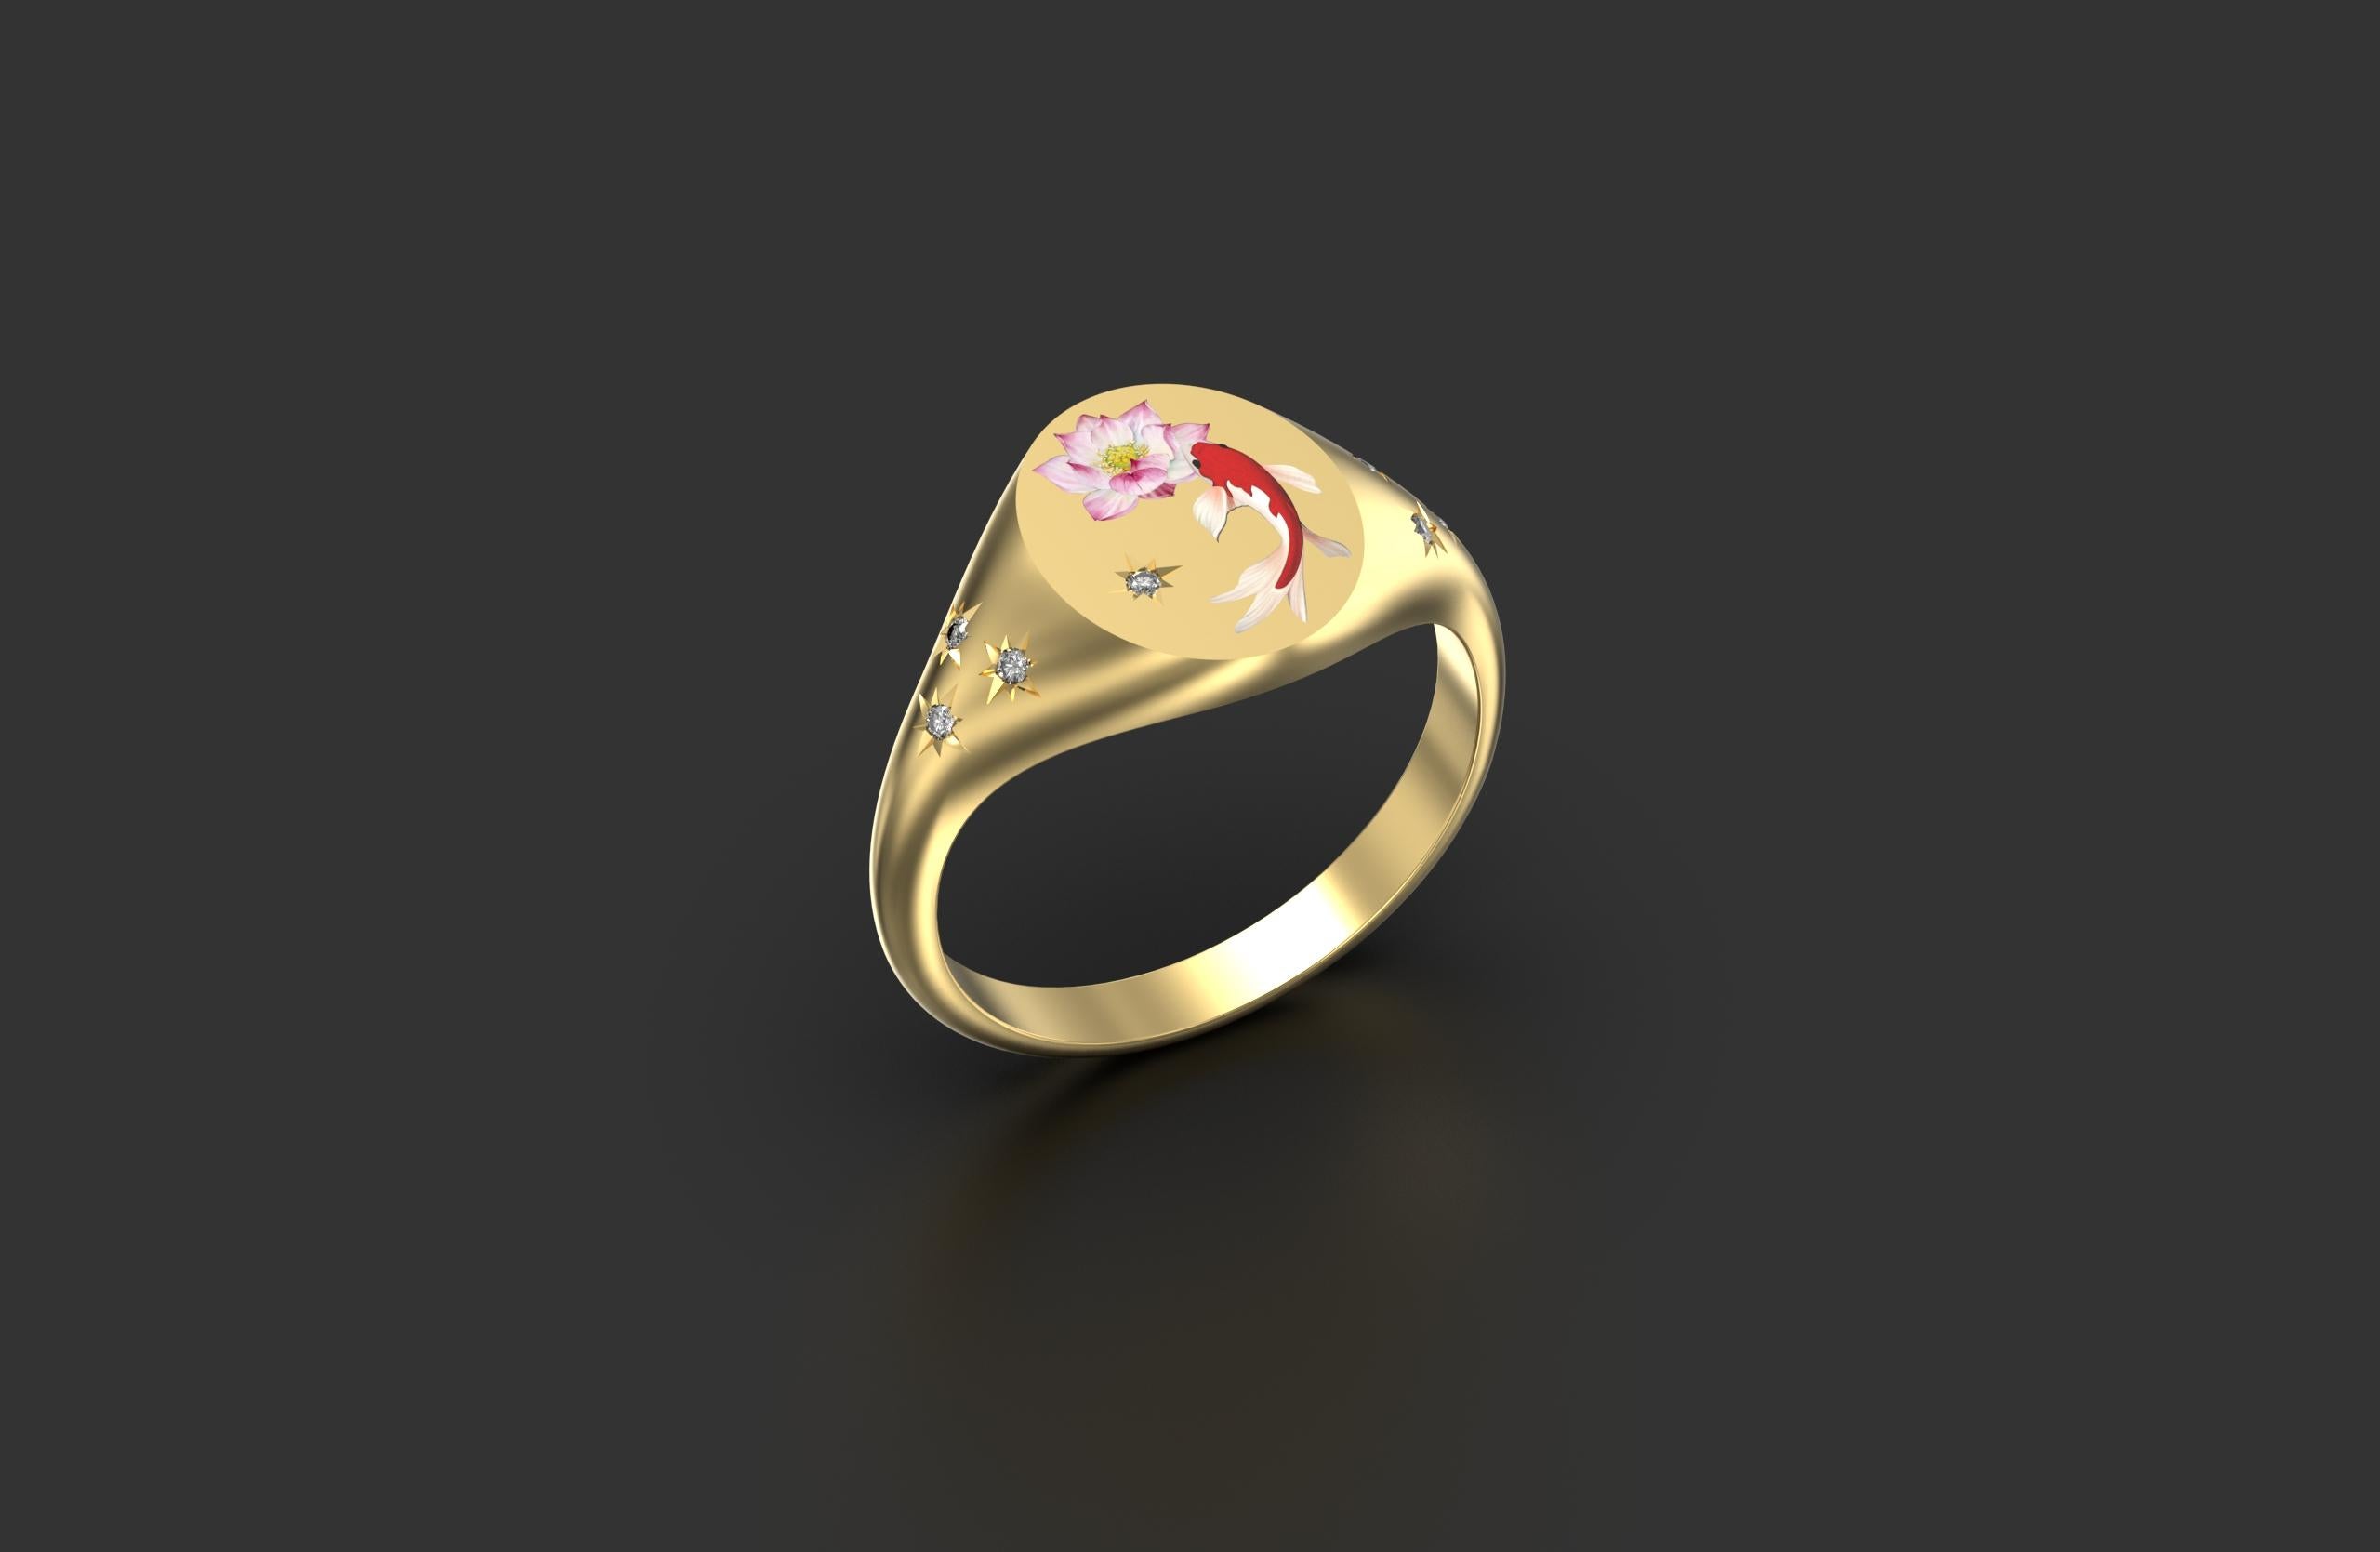 Koi is regarded as the 'luck messenger' in Asian culture, lotus flower is seen as sacred for purity and rebirth and strength.

 

Oval ring face: 9x11mm, band width: 2.5mm

 

Enamel hand-painted, complimented by seven star set diamonds. 18kt yellow